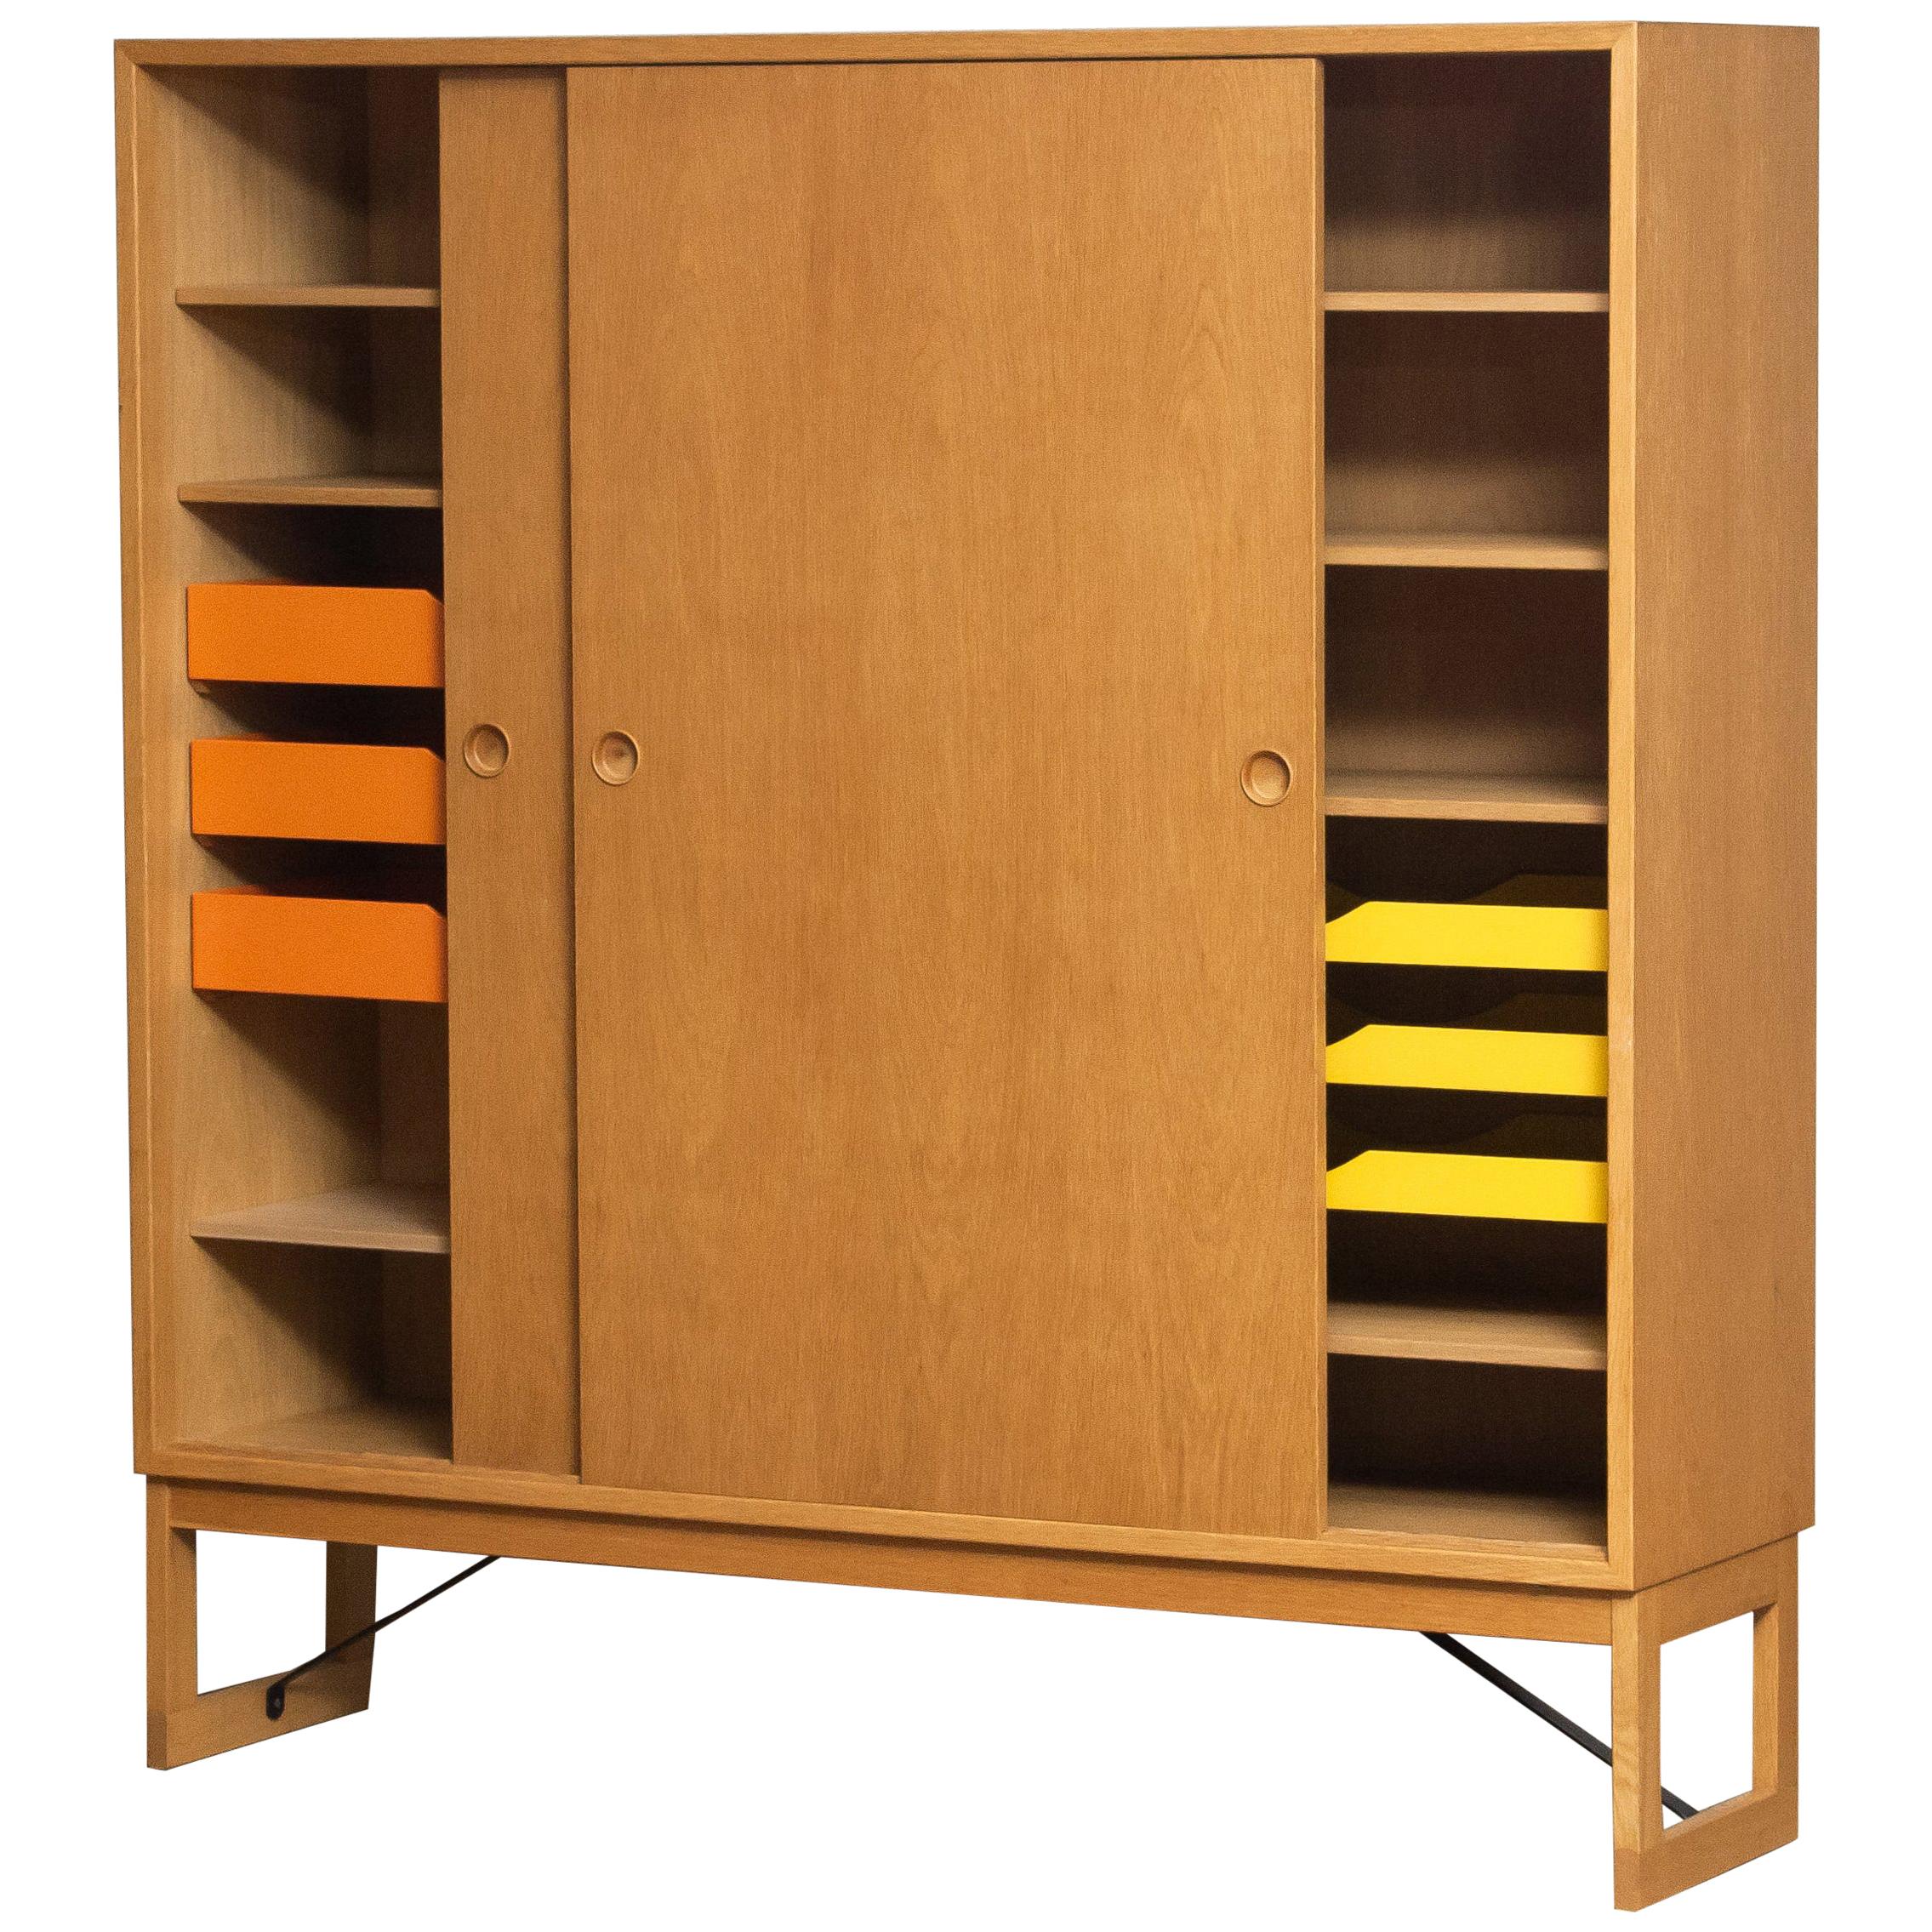 Beautiful and slim cabinet designed by Børge Mogensen for Karl Andersson & Söner, Sweden.
Consist two oak sliding doors seven oak shelf’s and six drawers. The drawers as well as the shelf’s are all adjustable.
The overall condition very good!